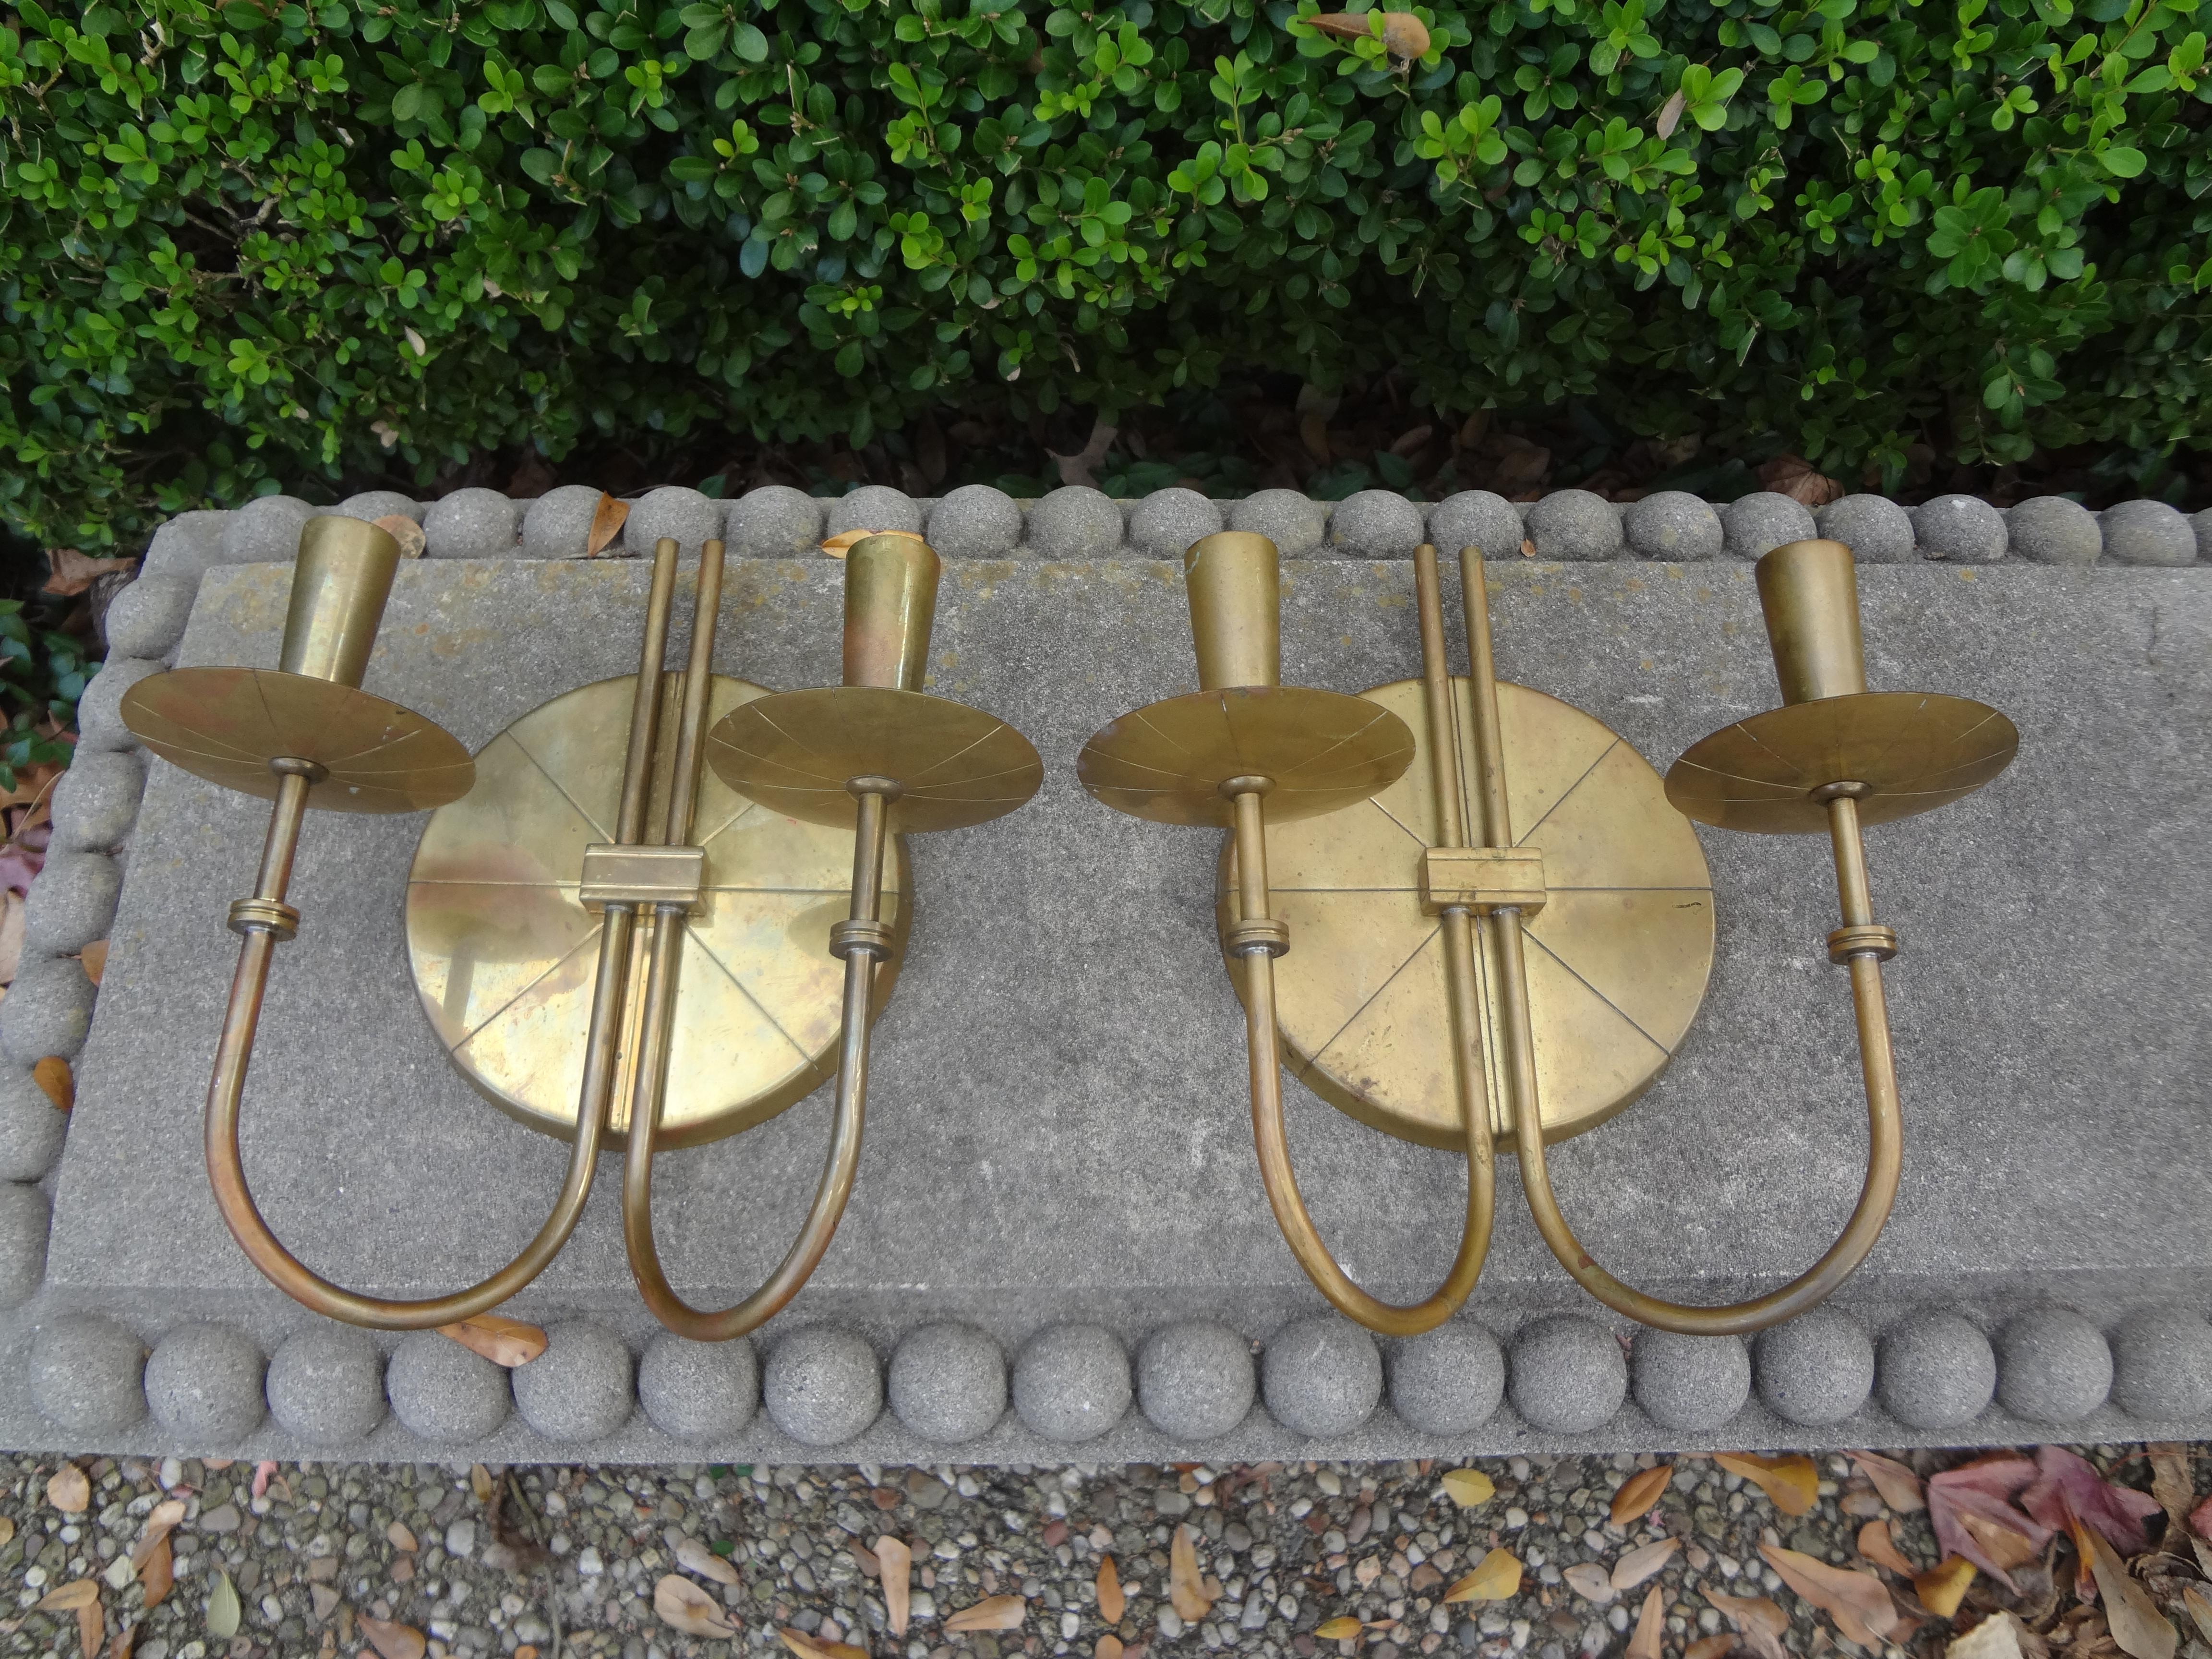 Fantastic pair of Mid-Century Modern brass sconces by Tommi Parzinger. These stunning modernist brass two-light sconces with geometric etched circular back plate were never electrified. Can be used with candles as originally designed or easily